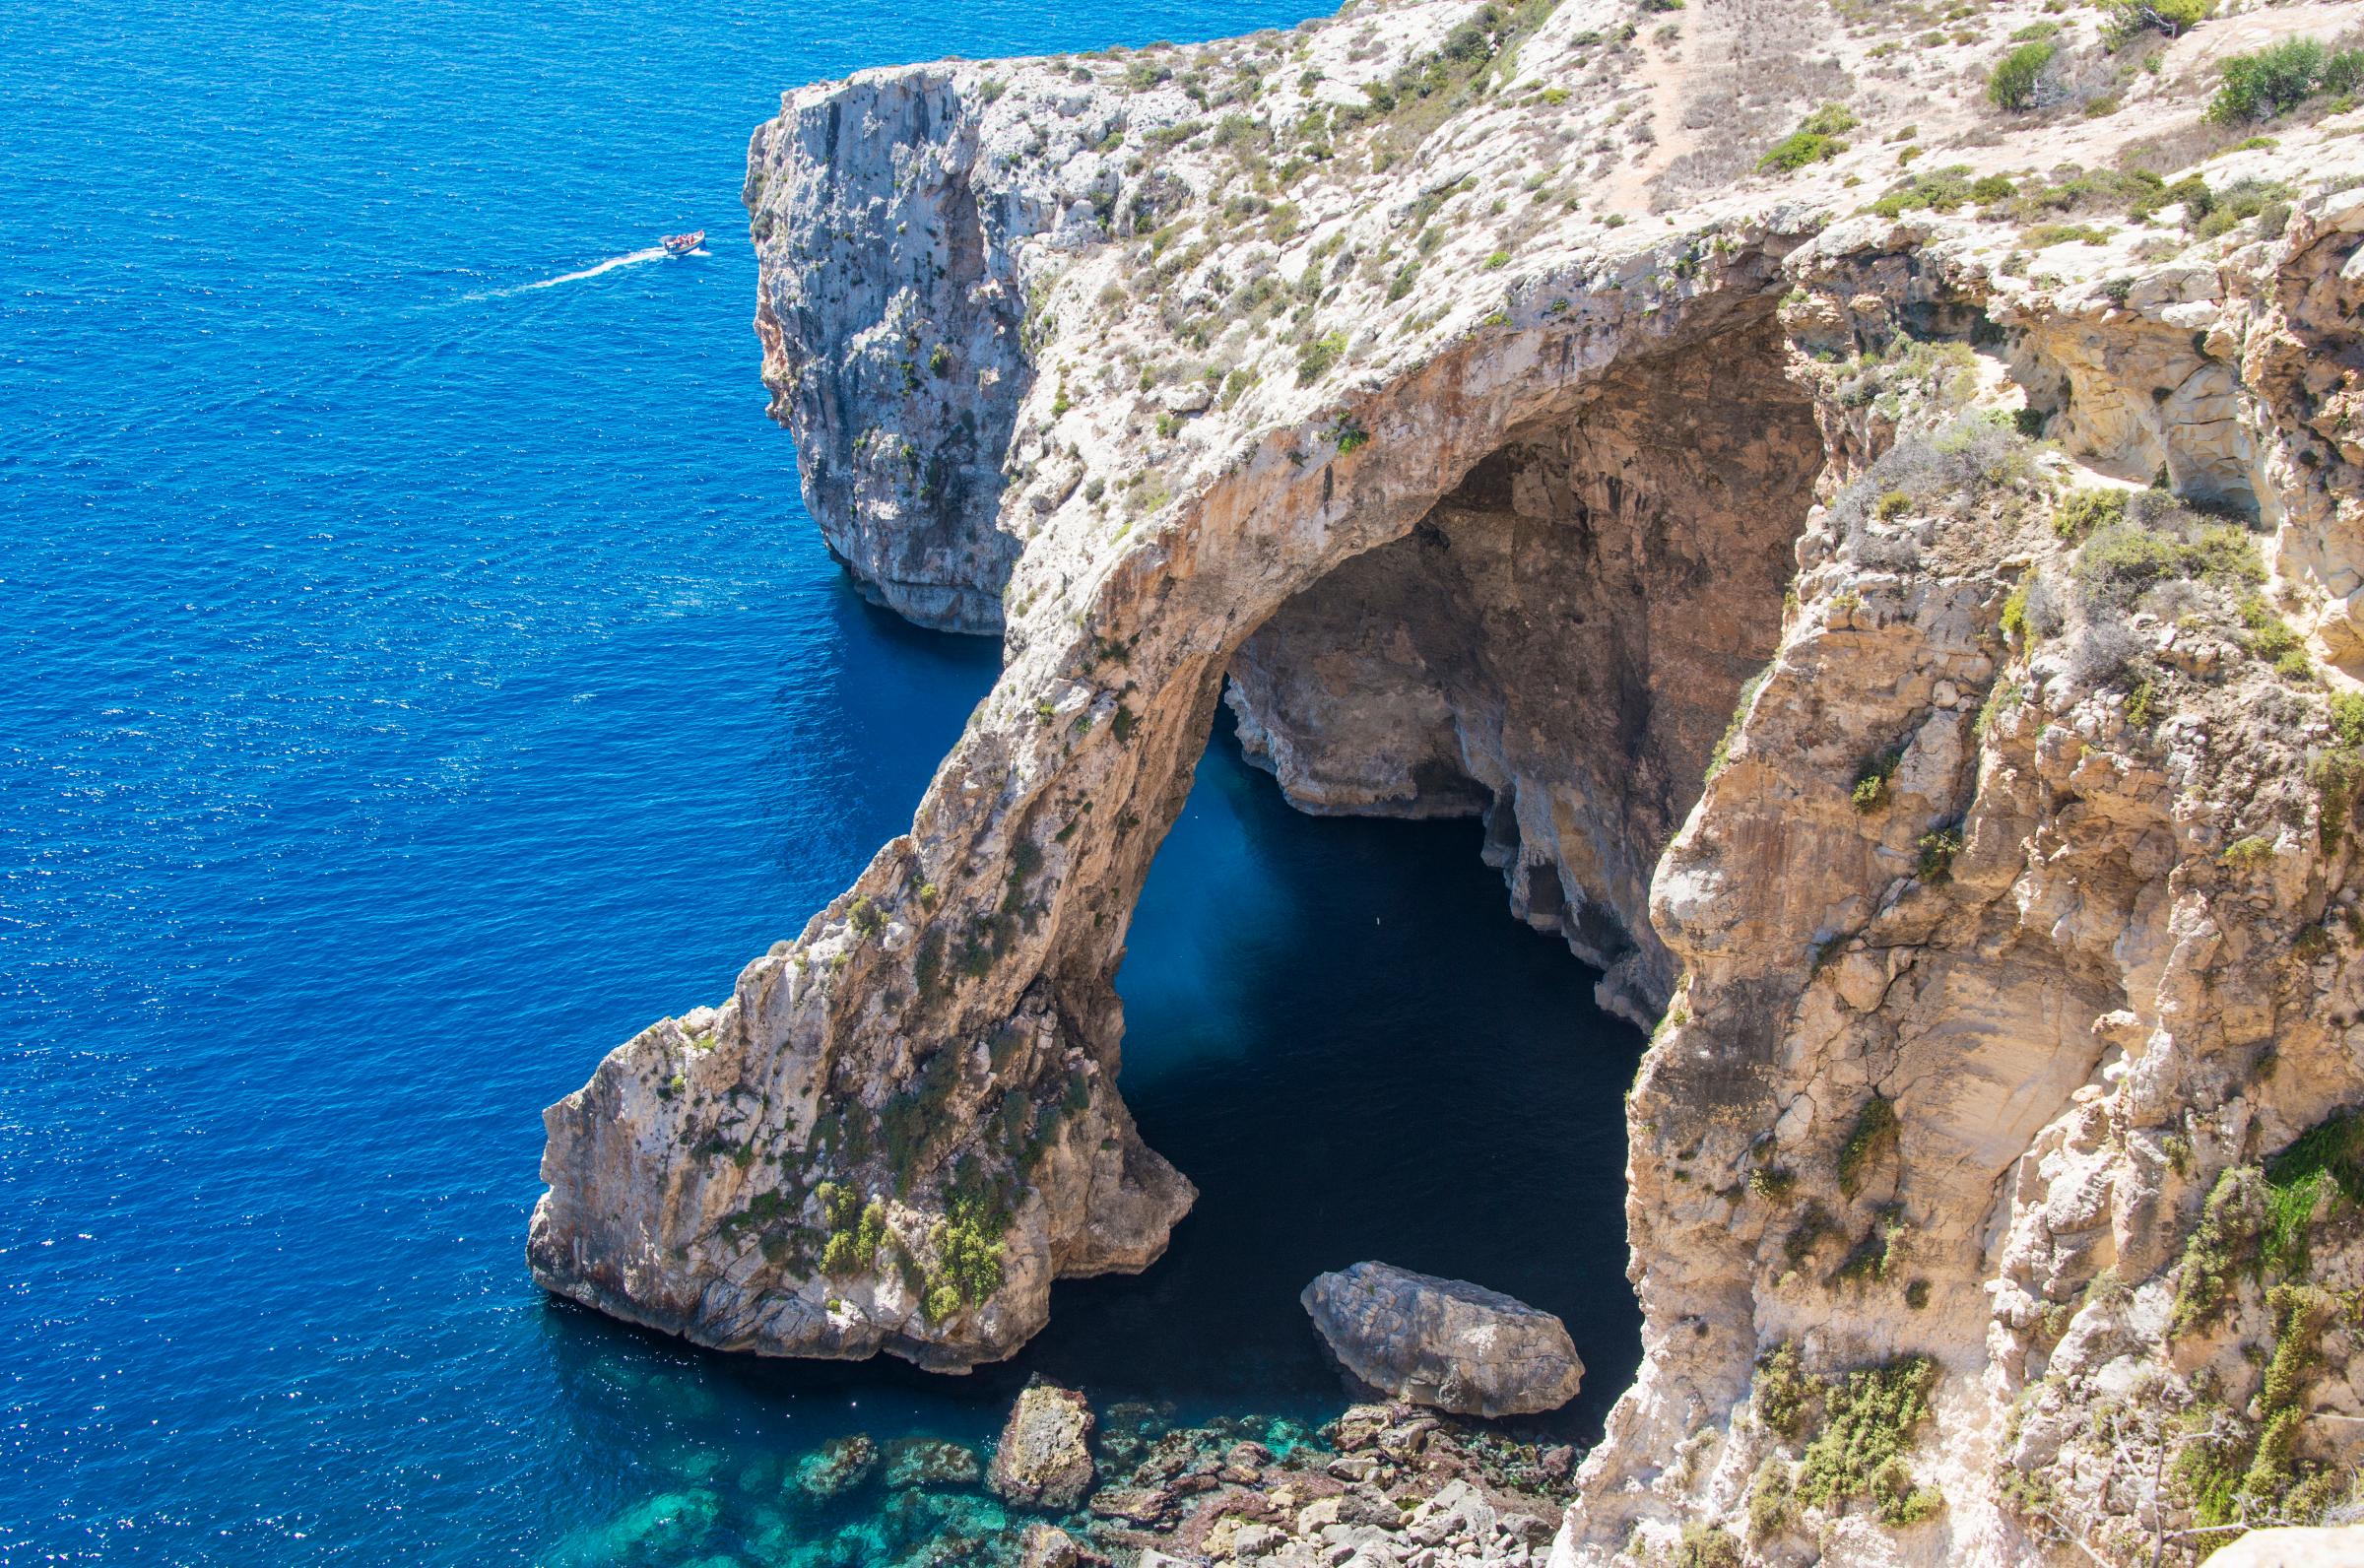 High angle view of a rock formation at the coast, Blue Grotto, South Coast, Malta